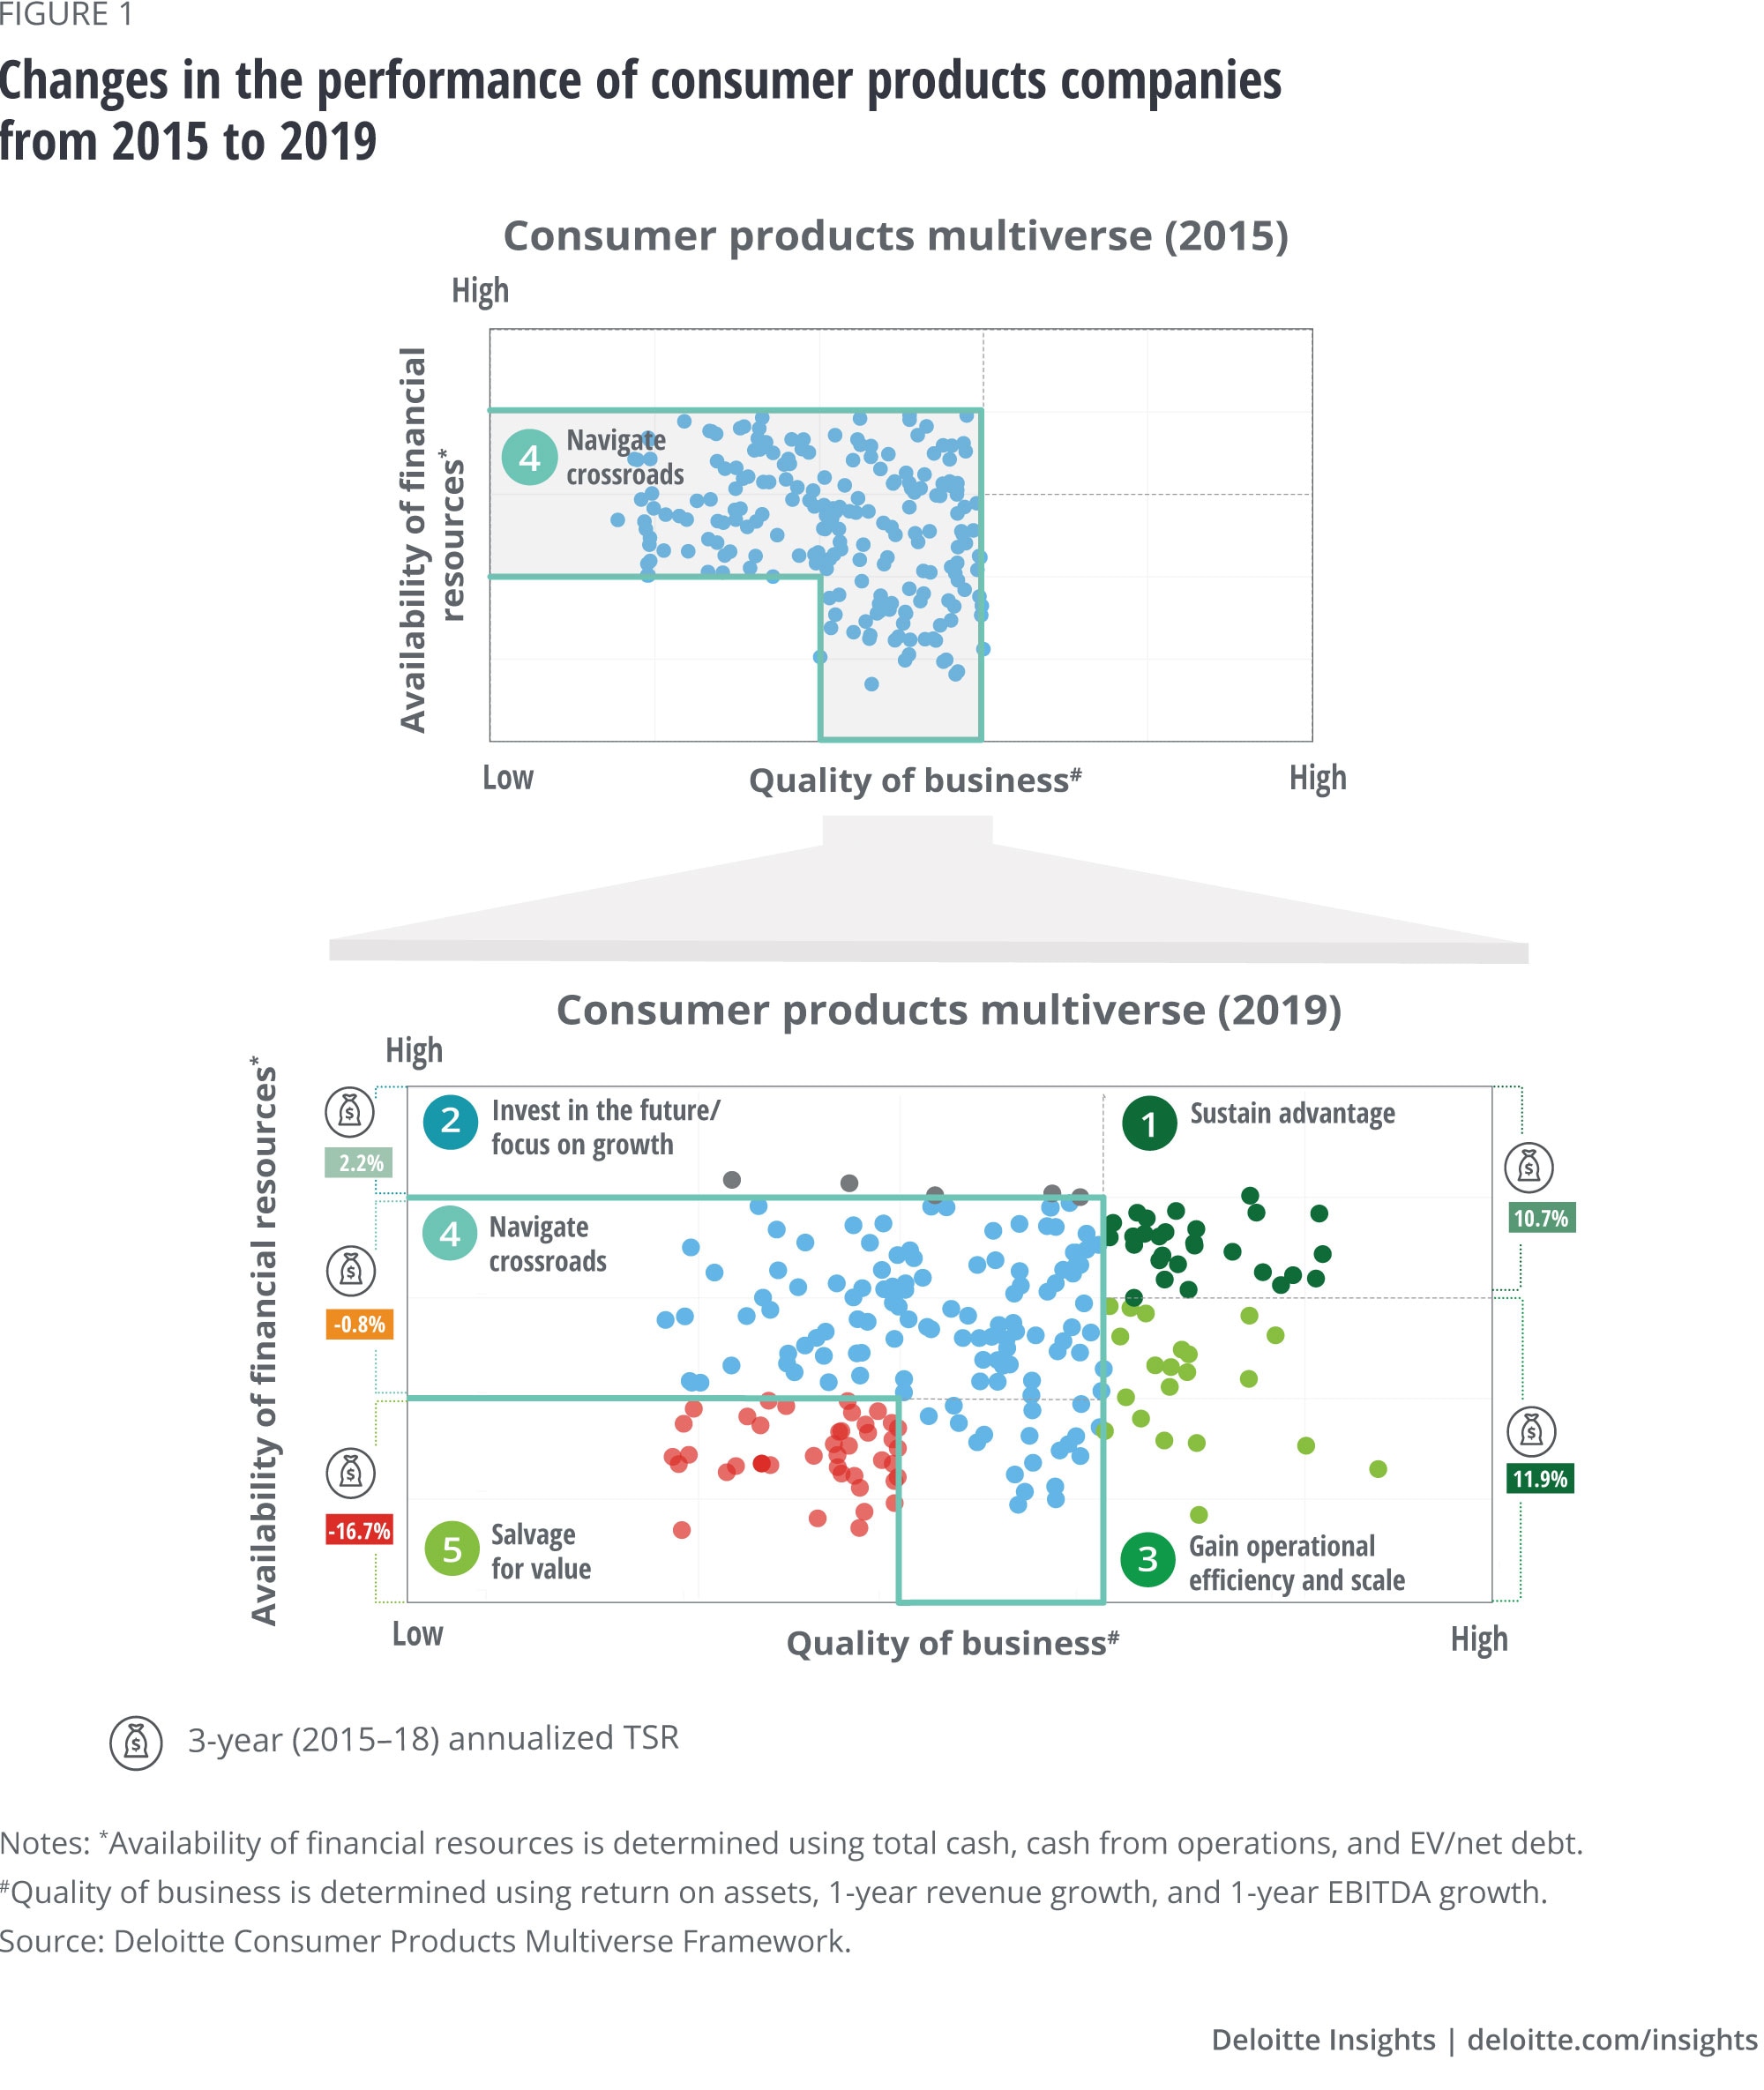 Changes in the performance of consumer products companies from 2015 to 2019